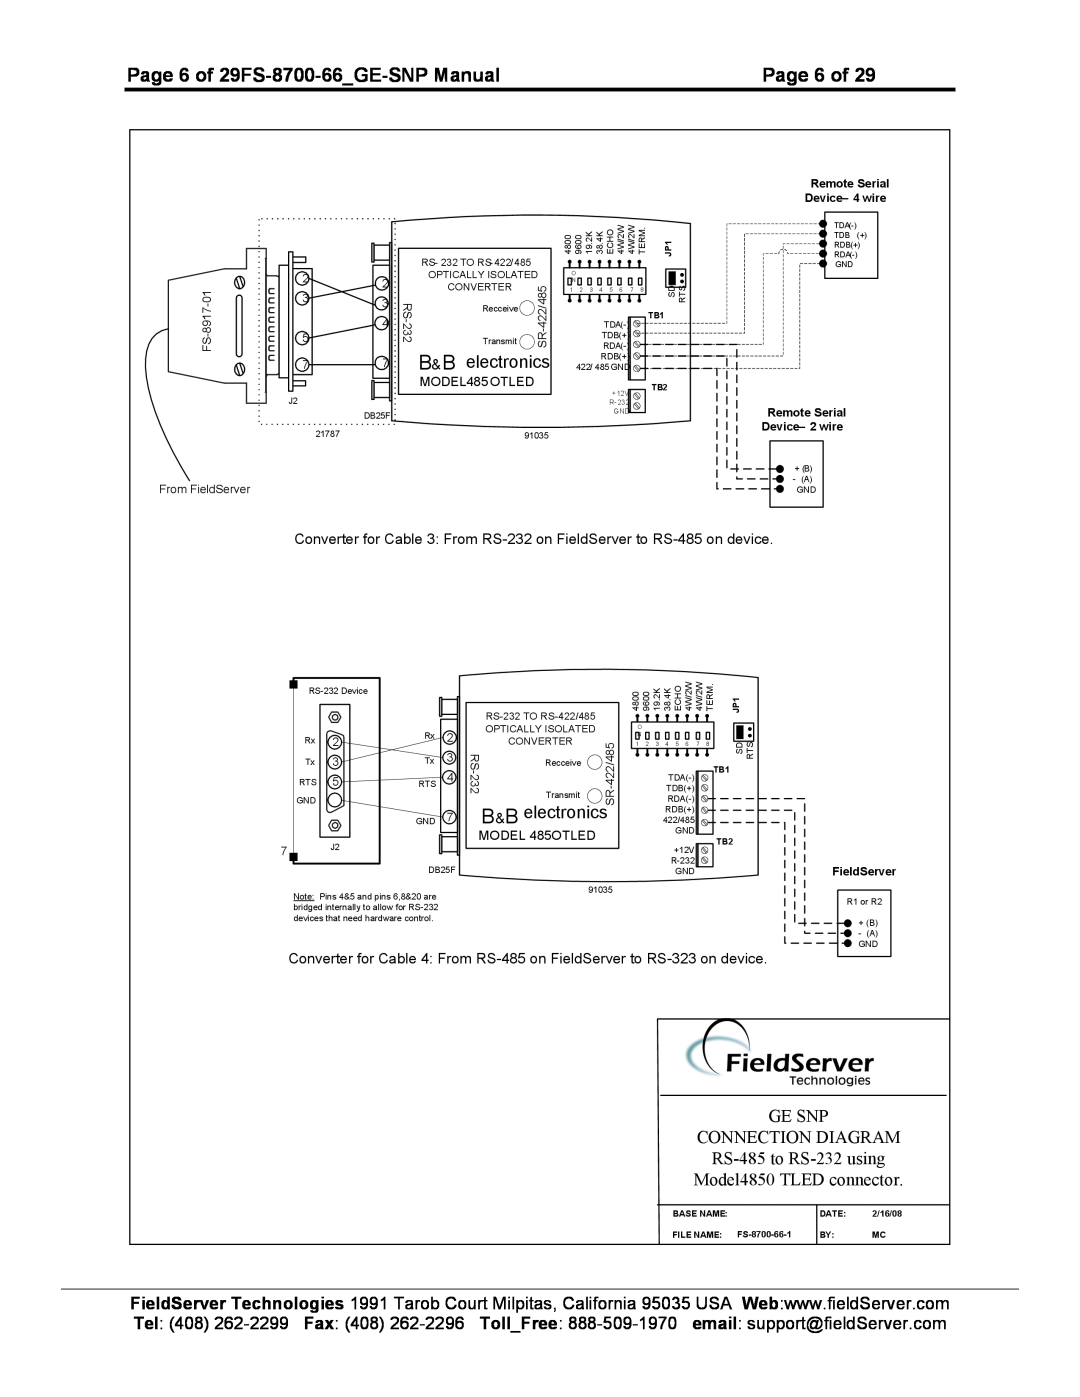 FieldServer FS-8700-66 GE SNP CONNECTION DIAGRAM RS-485 to RS-232 using, MODEL485OTLED, FS-8917-01 From FieldServer 